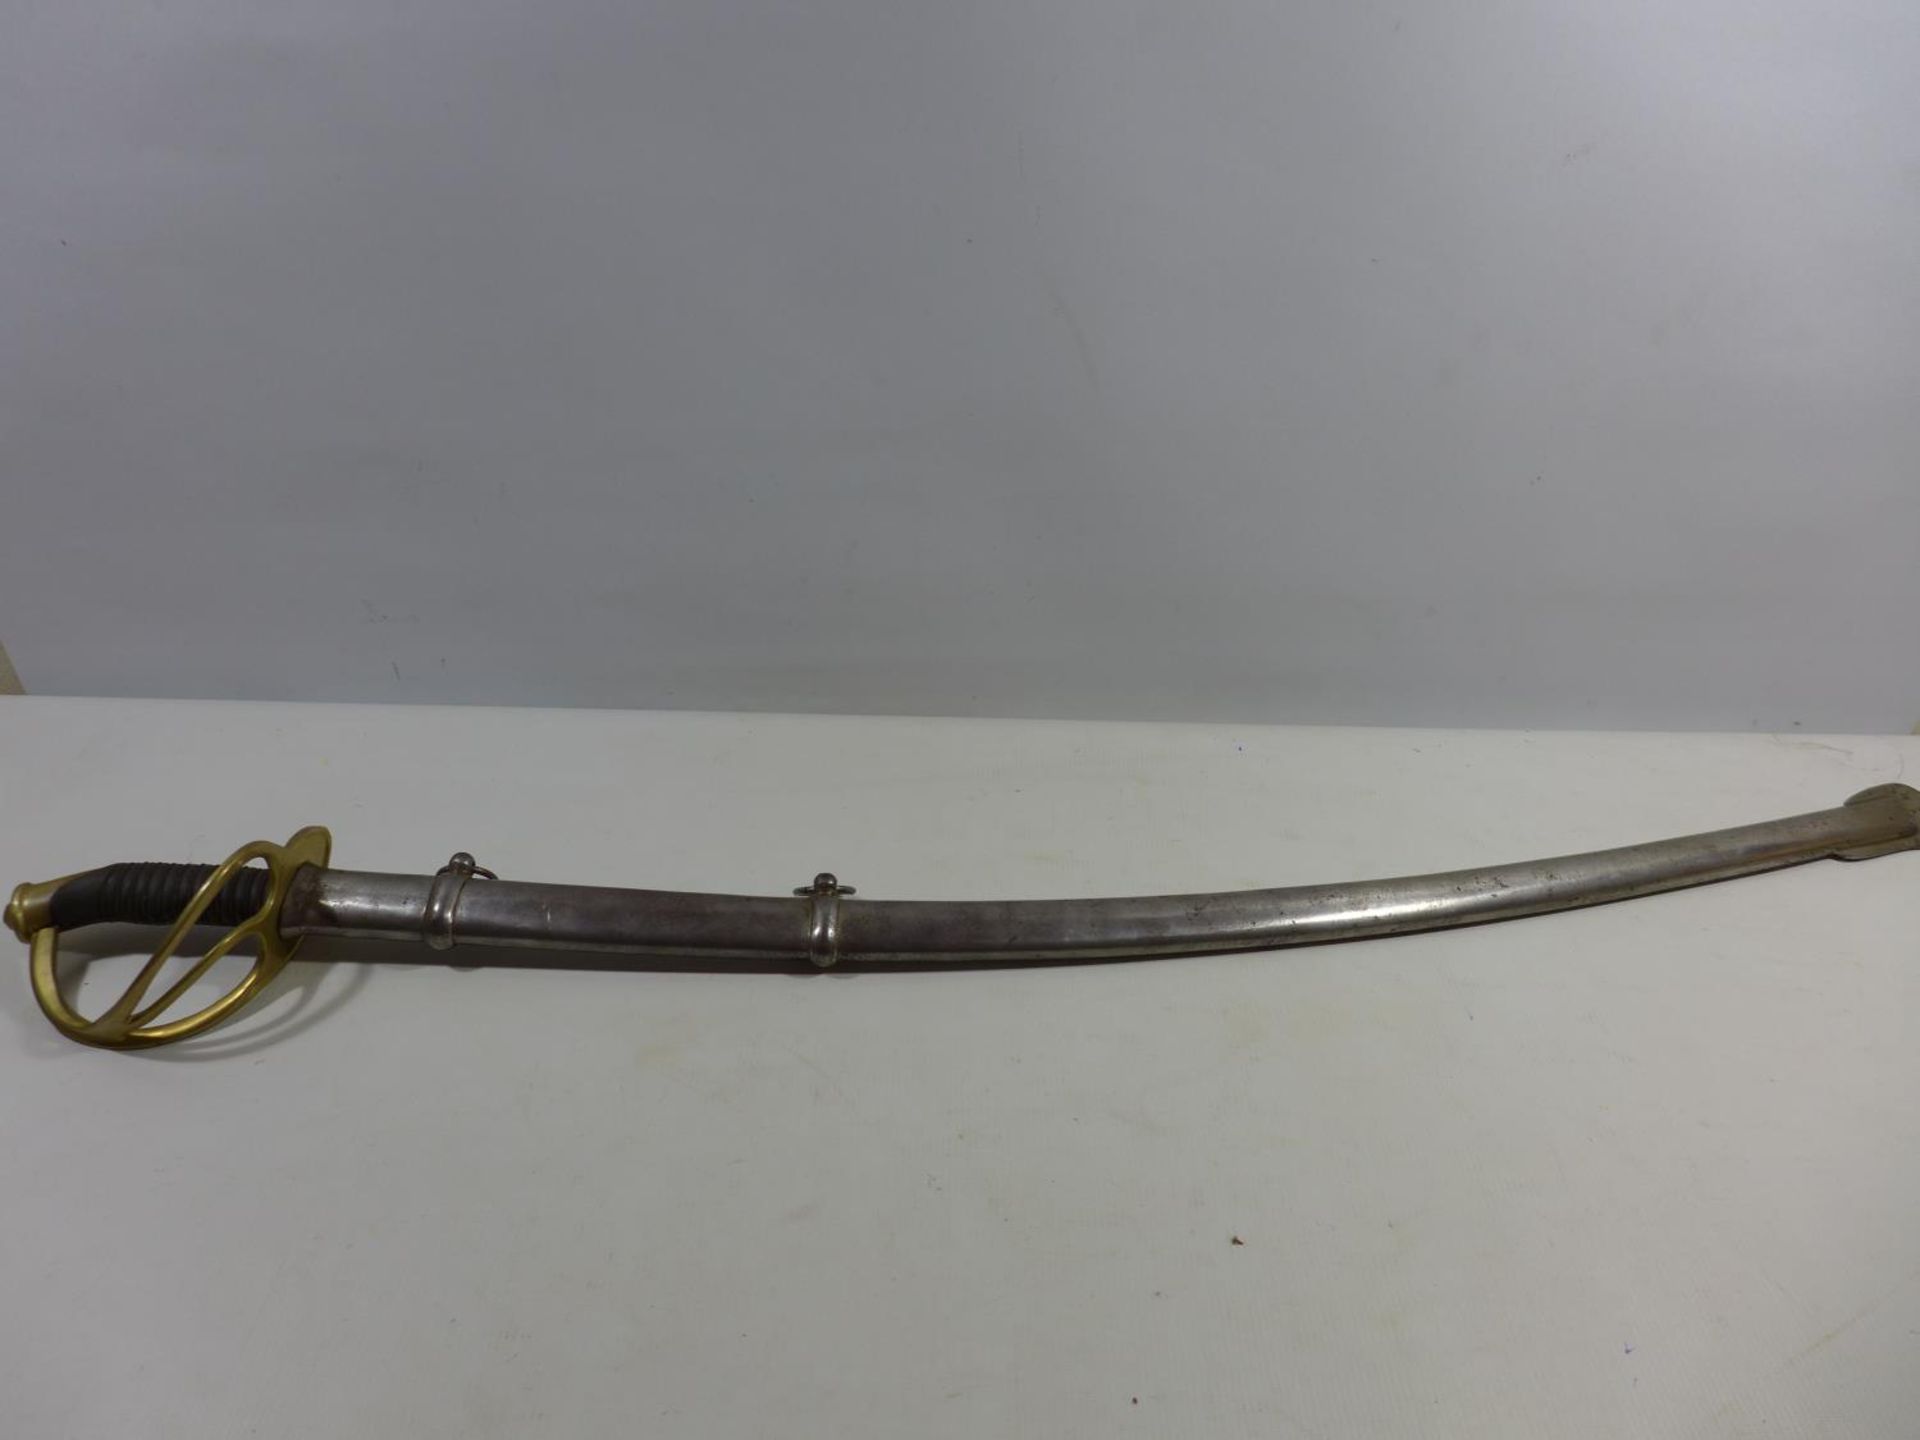 A CAVALRY SWORD AND SCABBARD OF UNKNOWN AGE, 87CM BLADE, PIERCED BRASS GUARD - Image 5 of 6